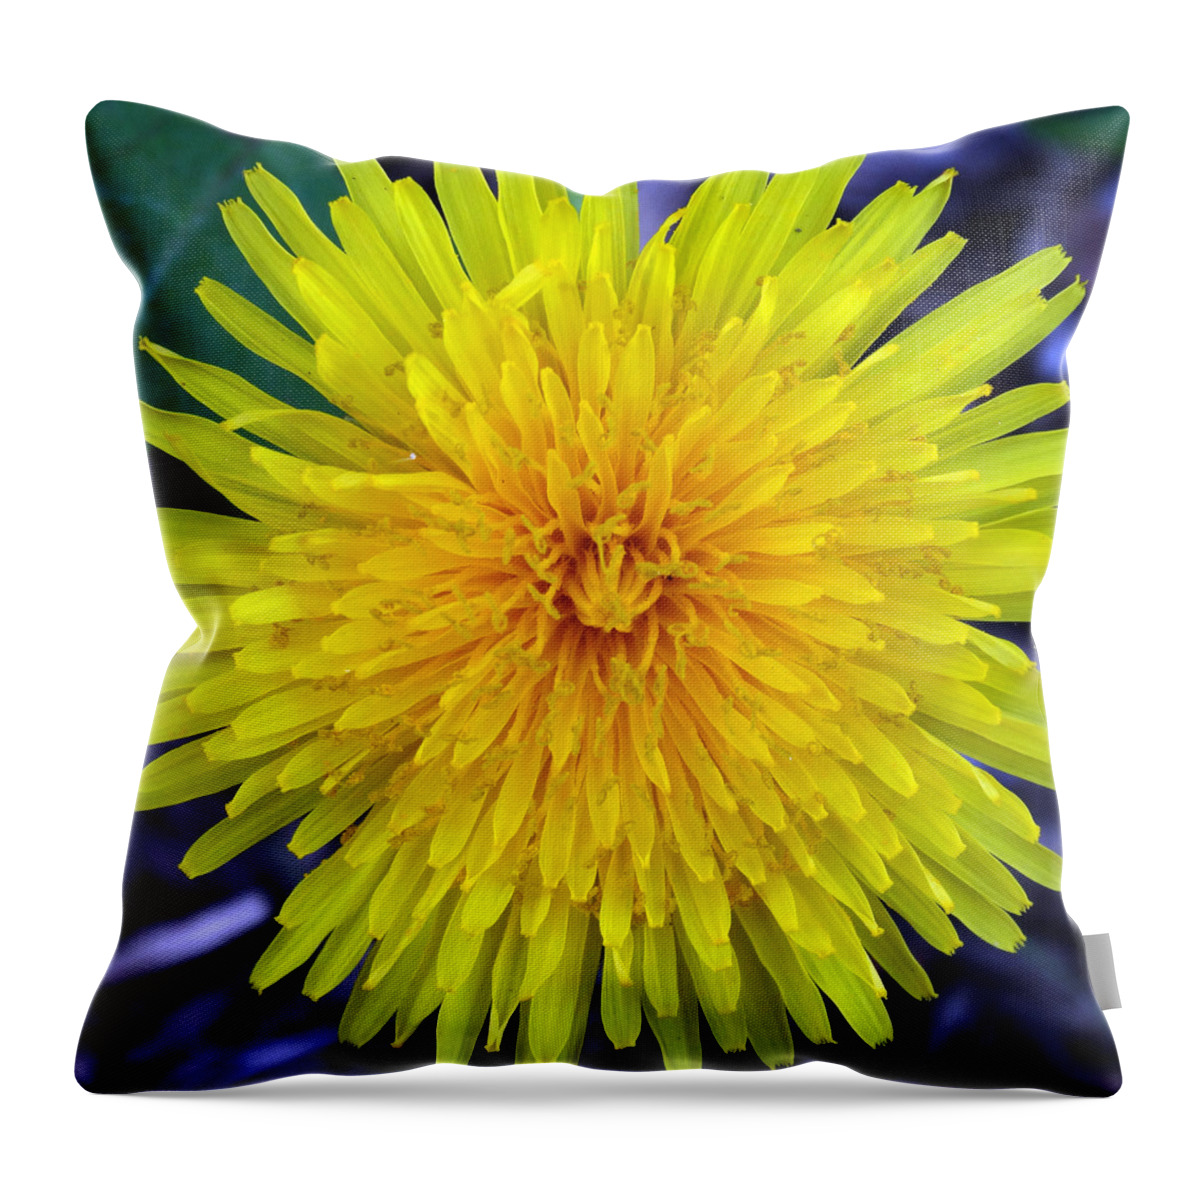 Dandelion Throw Pillow featuring the photograph Just a Dandelion by David T Wilkinson